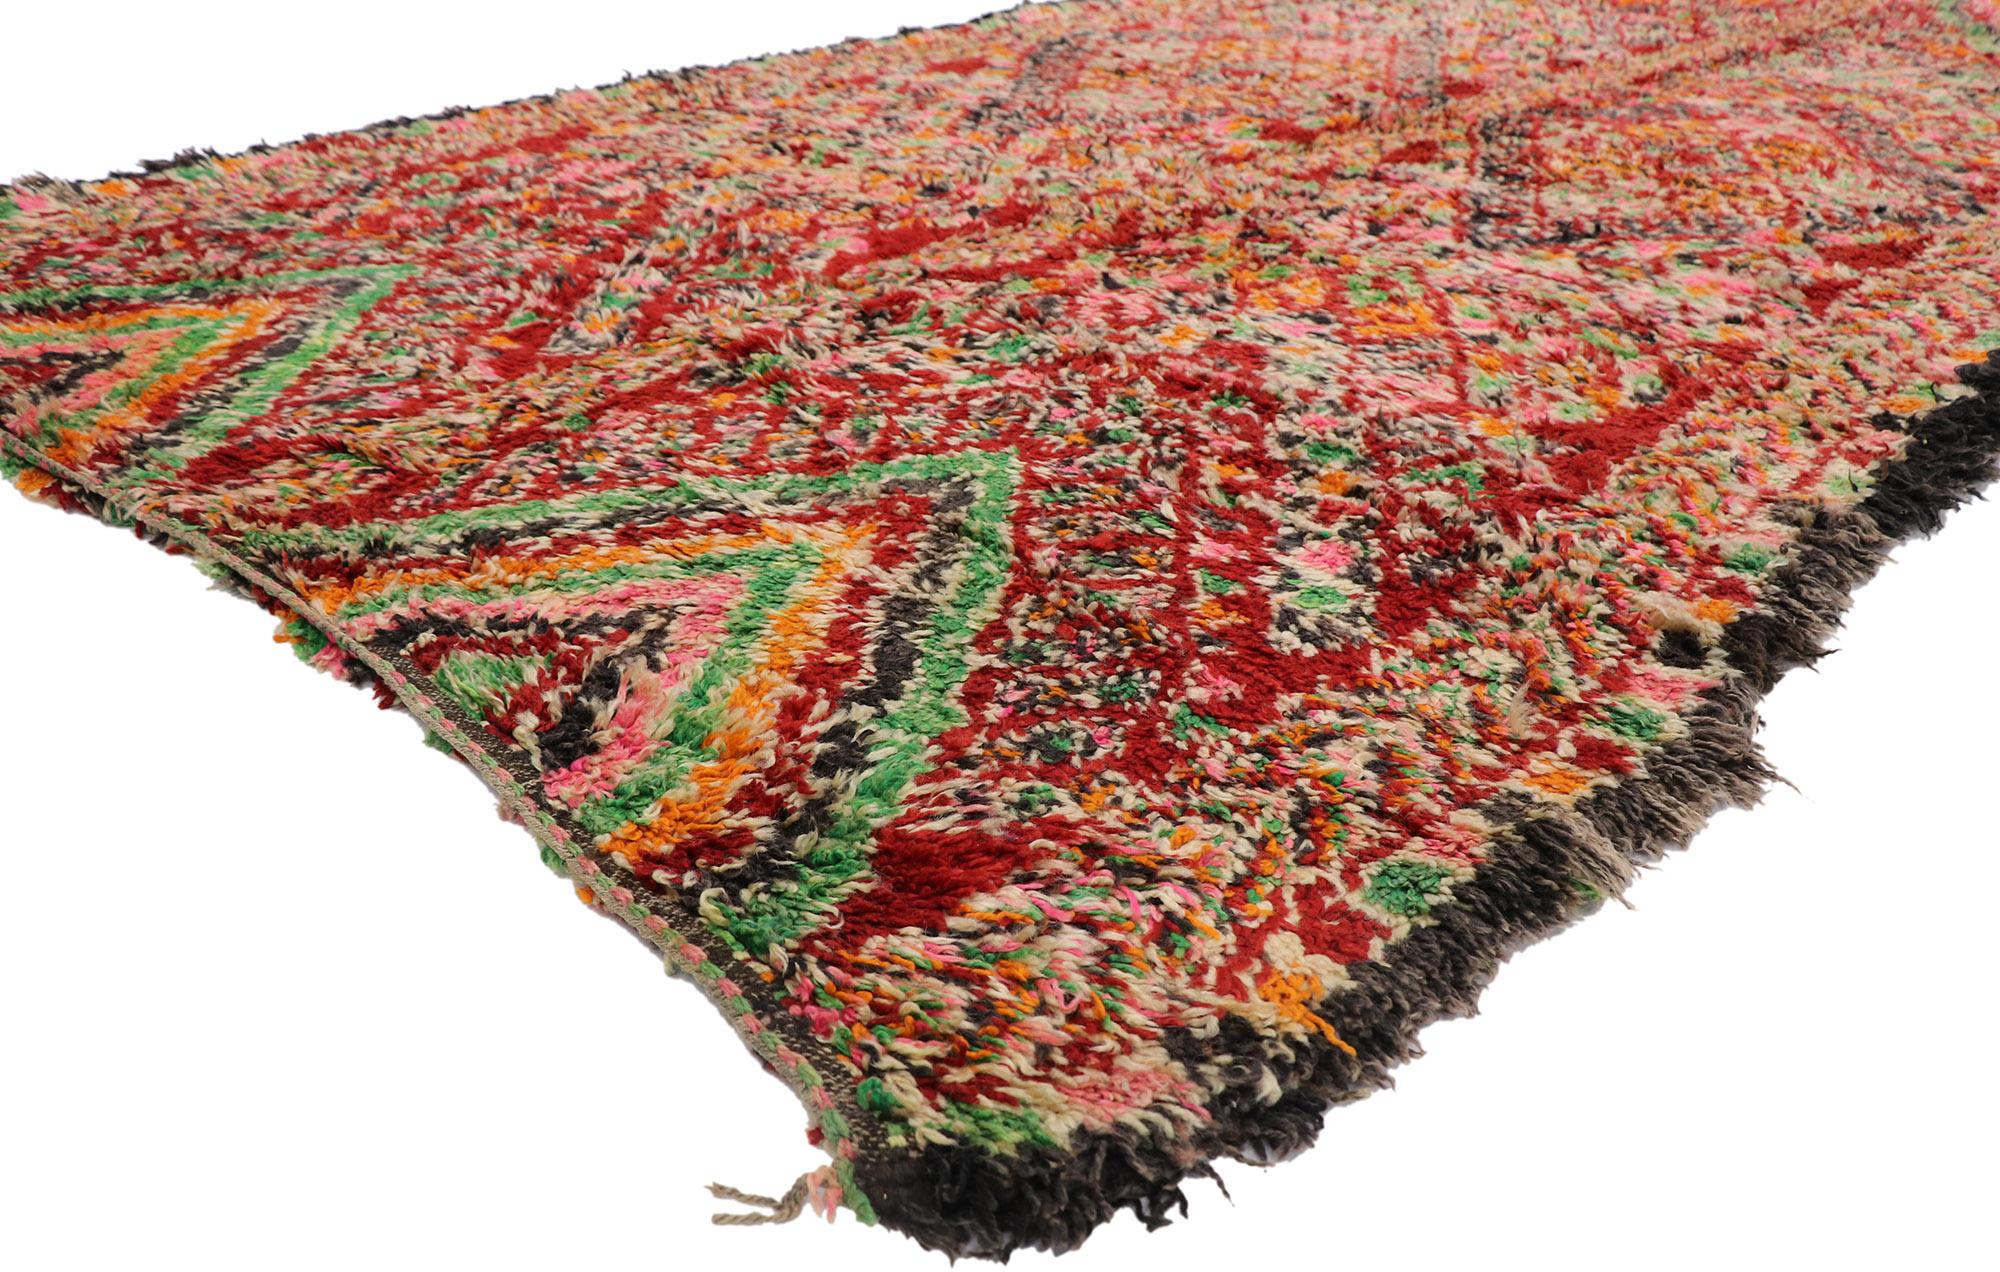 21273 Vintage Berber Beni M'Guild Moroccan Rug with Boho Chic Tribal Style 06'01 x 12'05. Showcasing a bold expressive design, incredible detail and texture, this hand knotted wool vintage Berber Beni M'Guild Moroccan rug is a captivating vision of